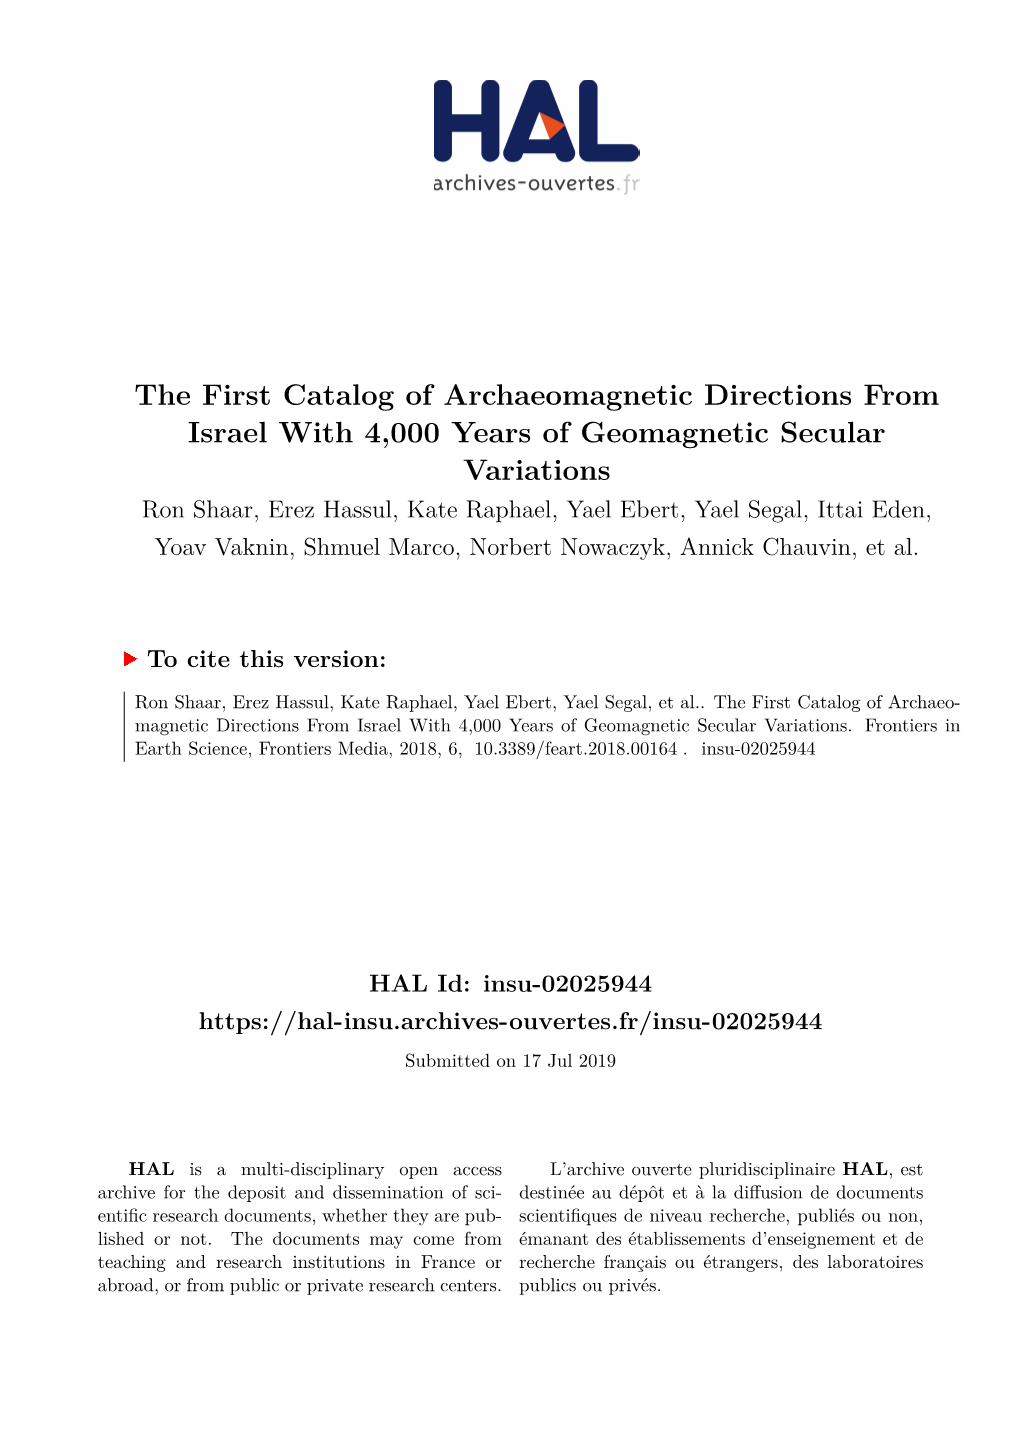 The First Catalog of Archaeomagnetic Directions from Israel with 4,000